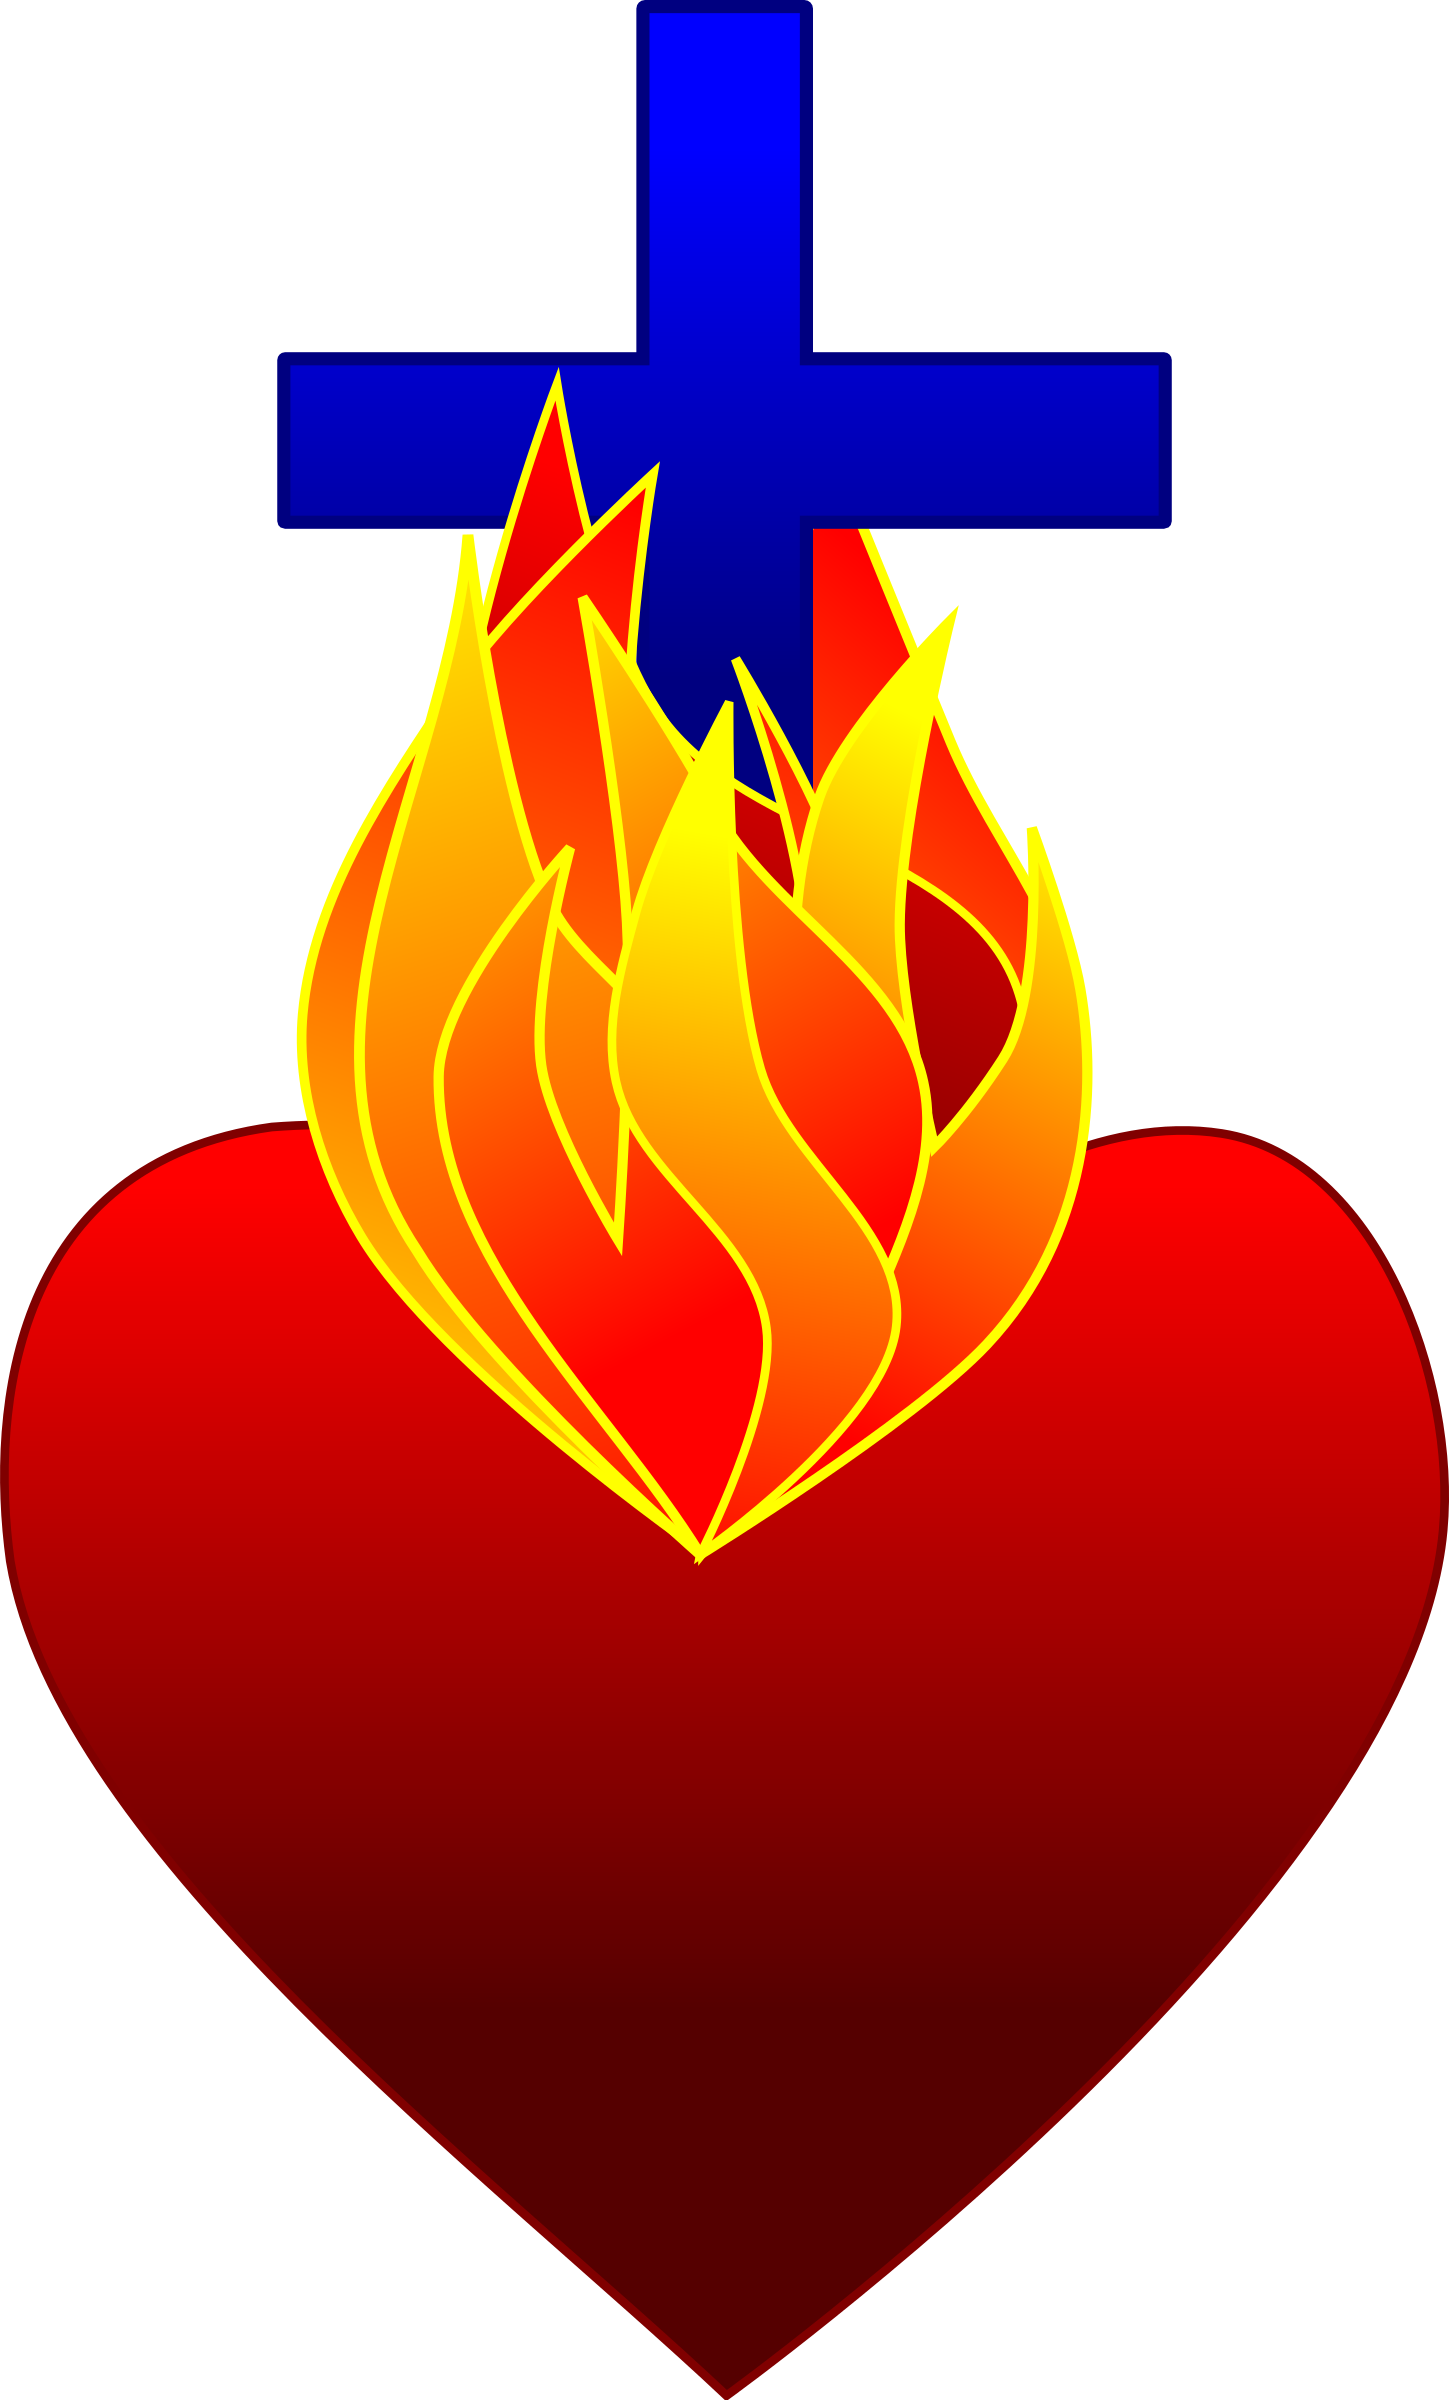 Fire cliparthot of sacred. Flame clipart cross